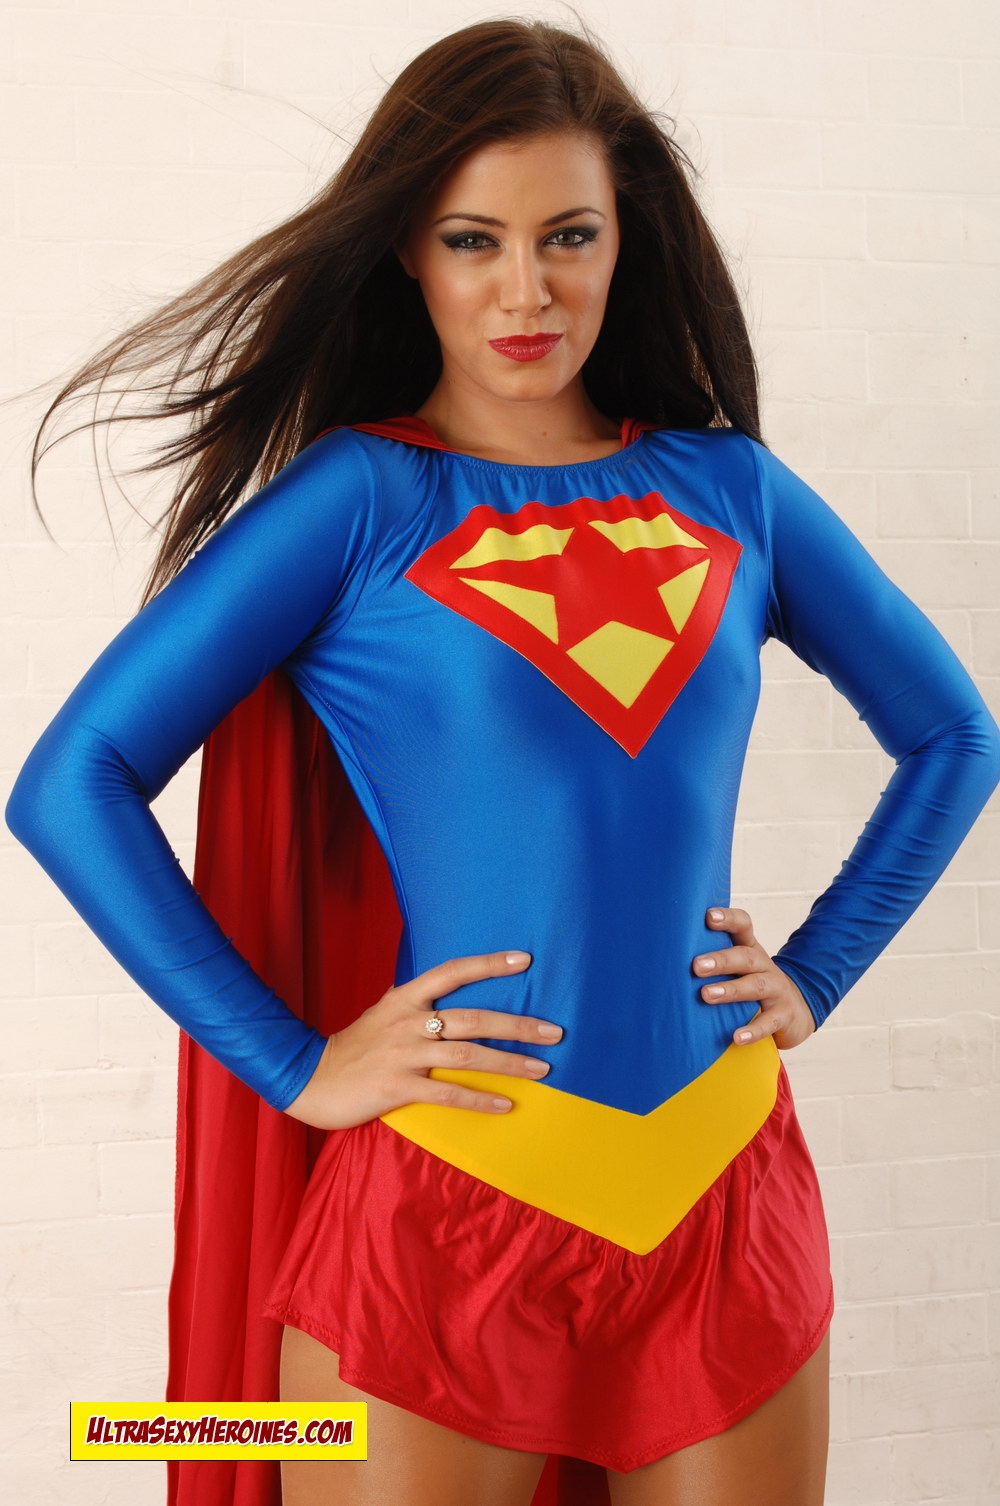 [UltraSexyHeroines] Super Heroine Cosplay Nude - Holly 63